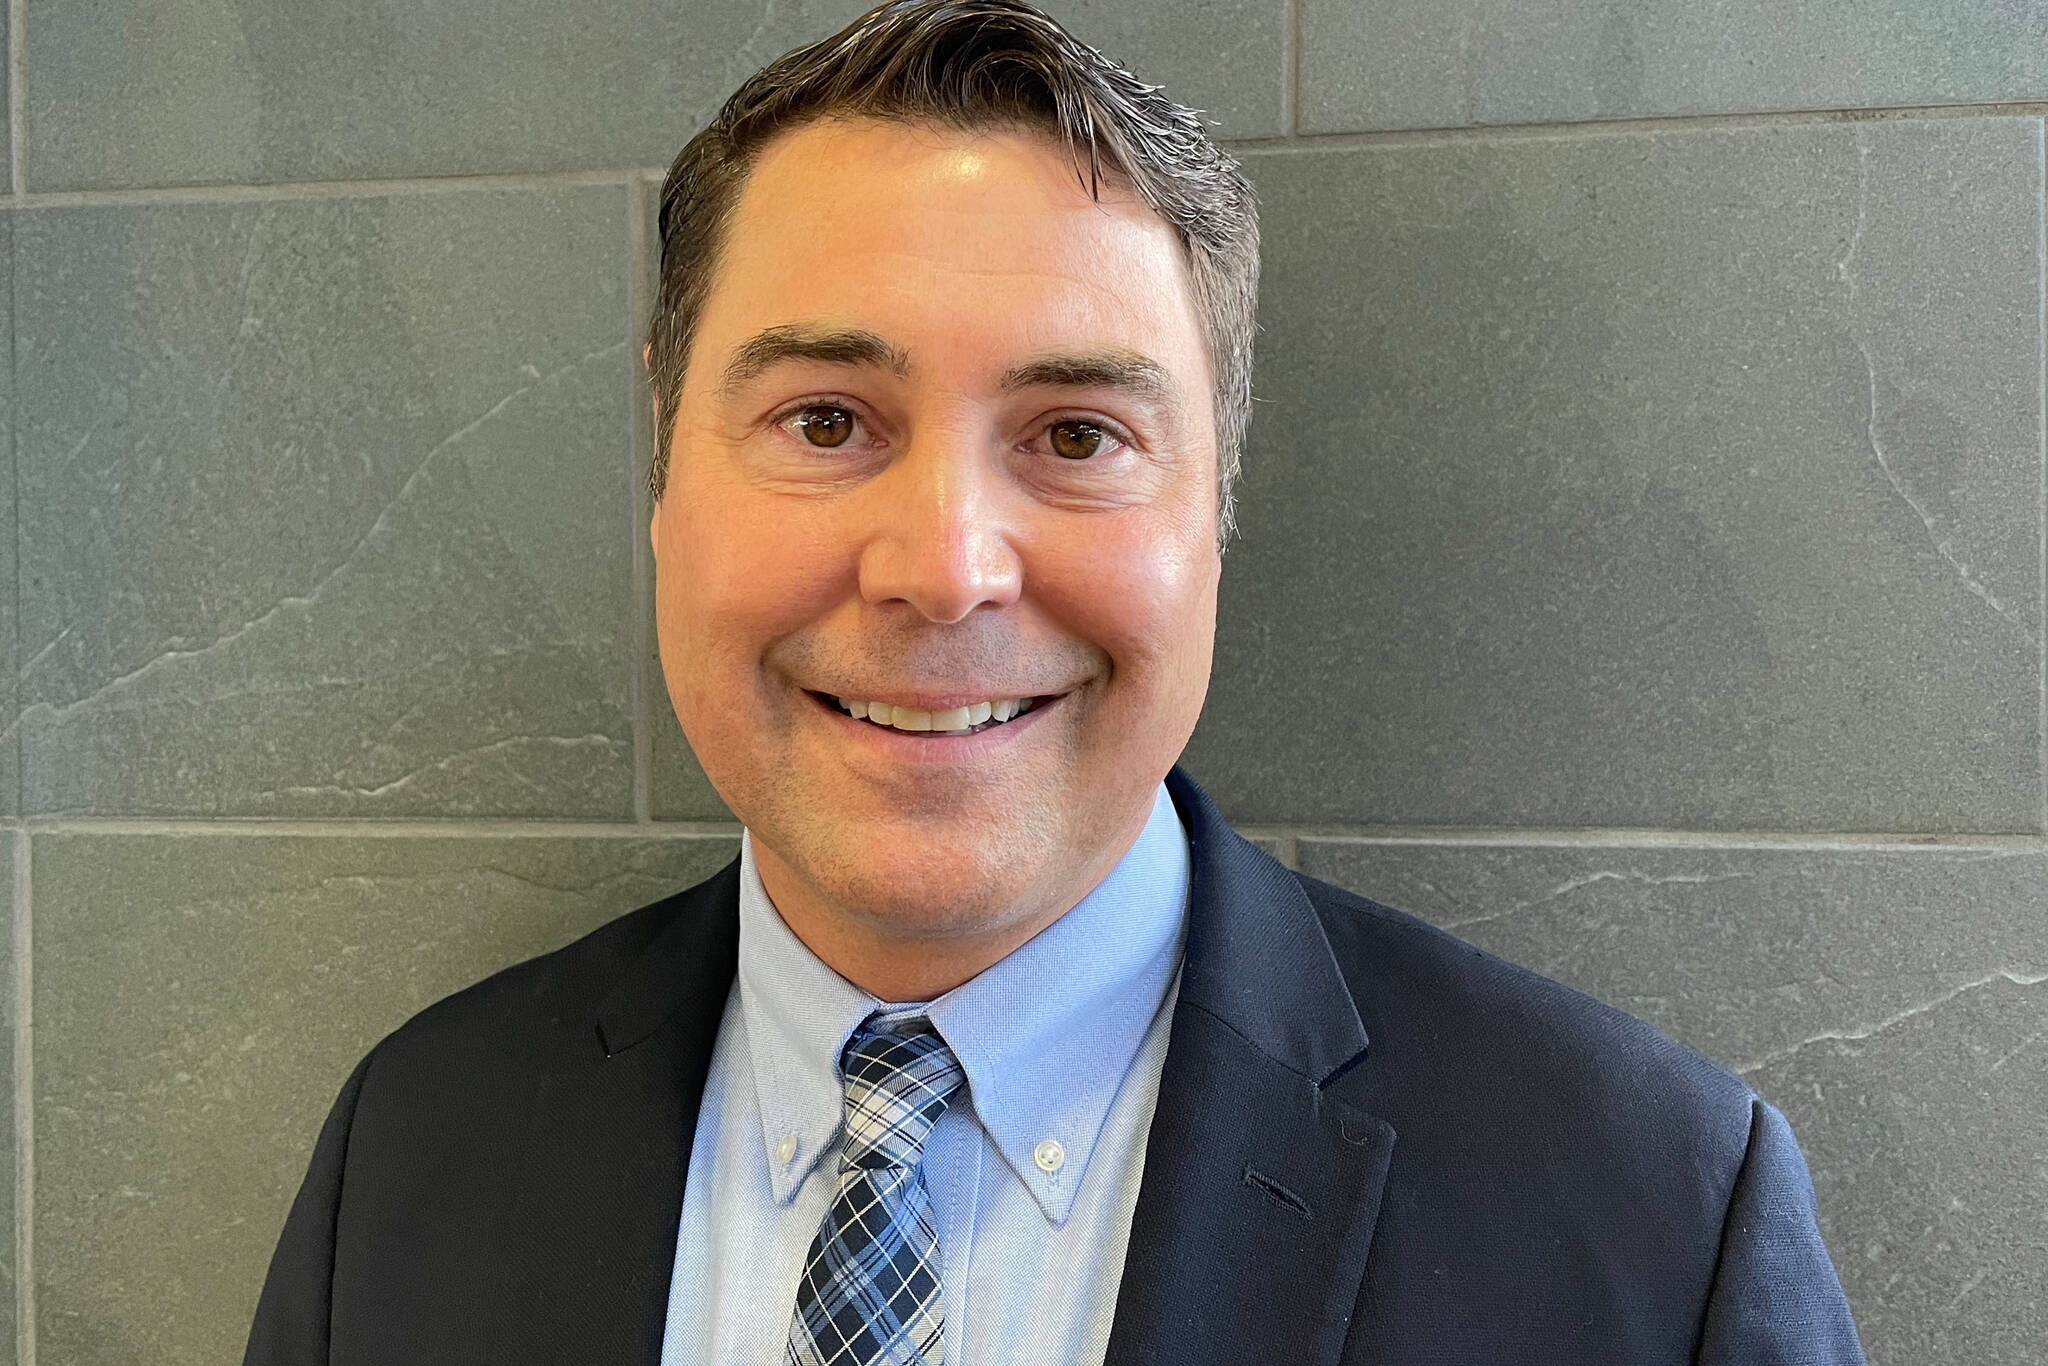 Shawn Arnold has been selected as principal of Thunder Mountain High School, to begin that role with the new school year in late July. (Michael S. Lockett / Juneau Empire File)